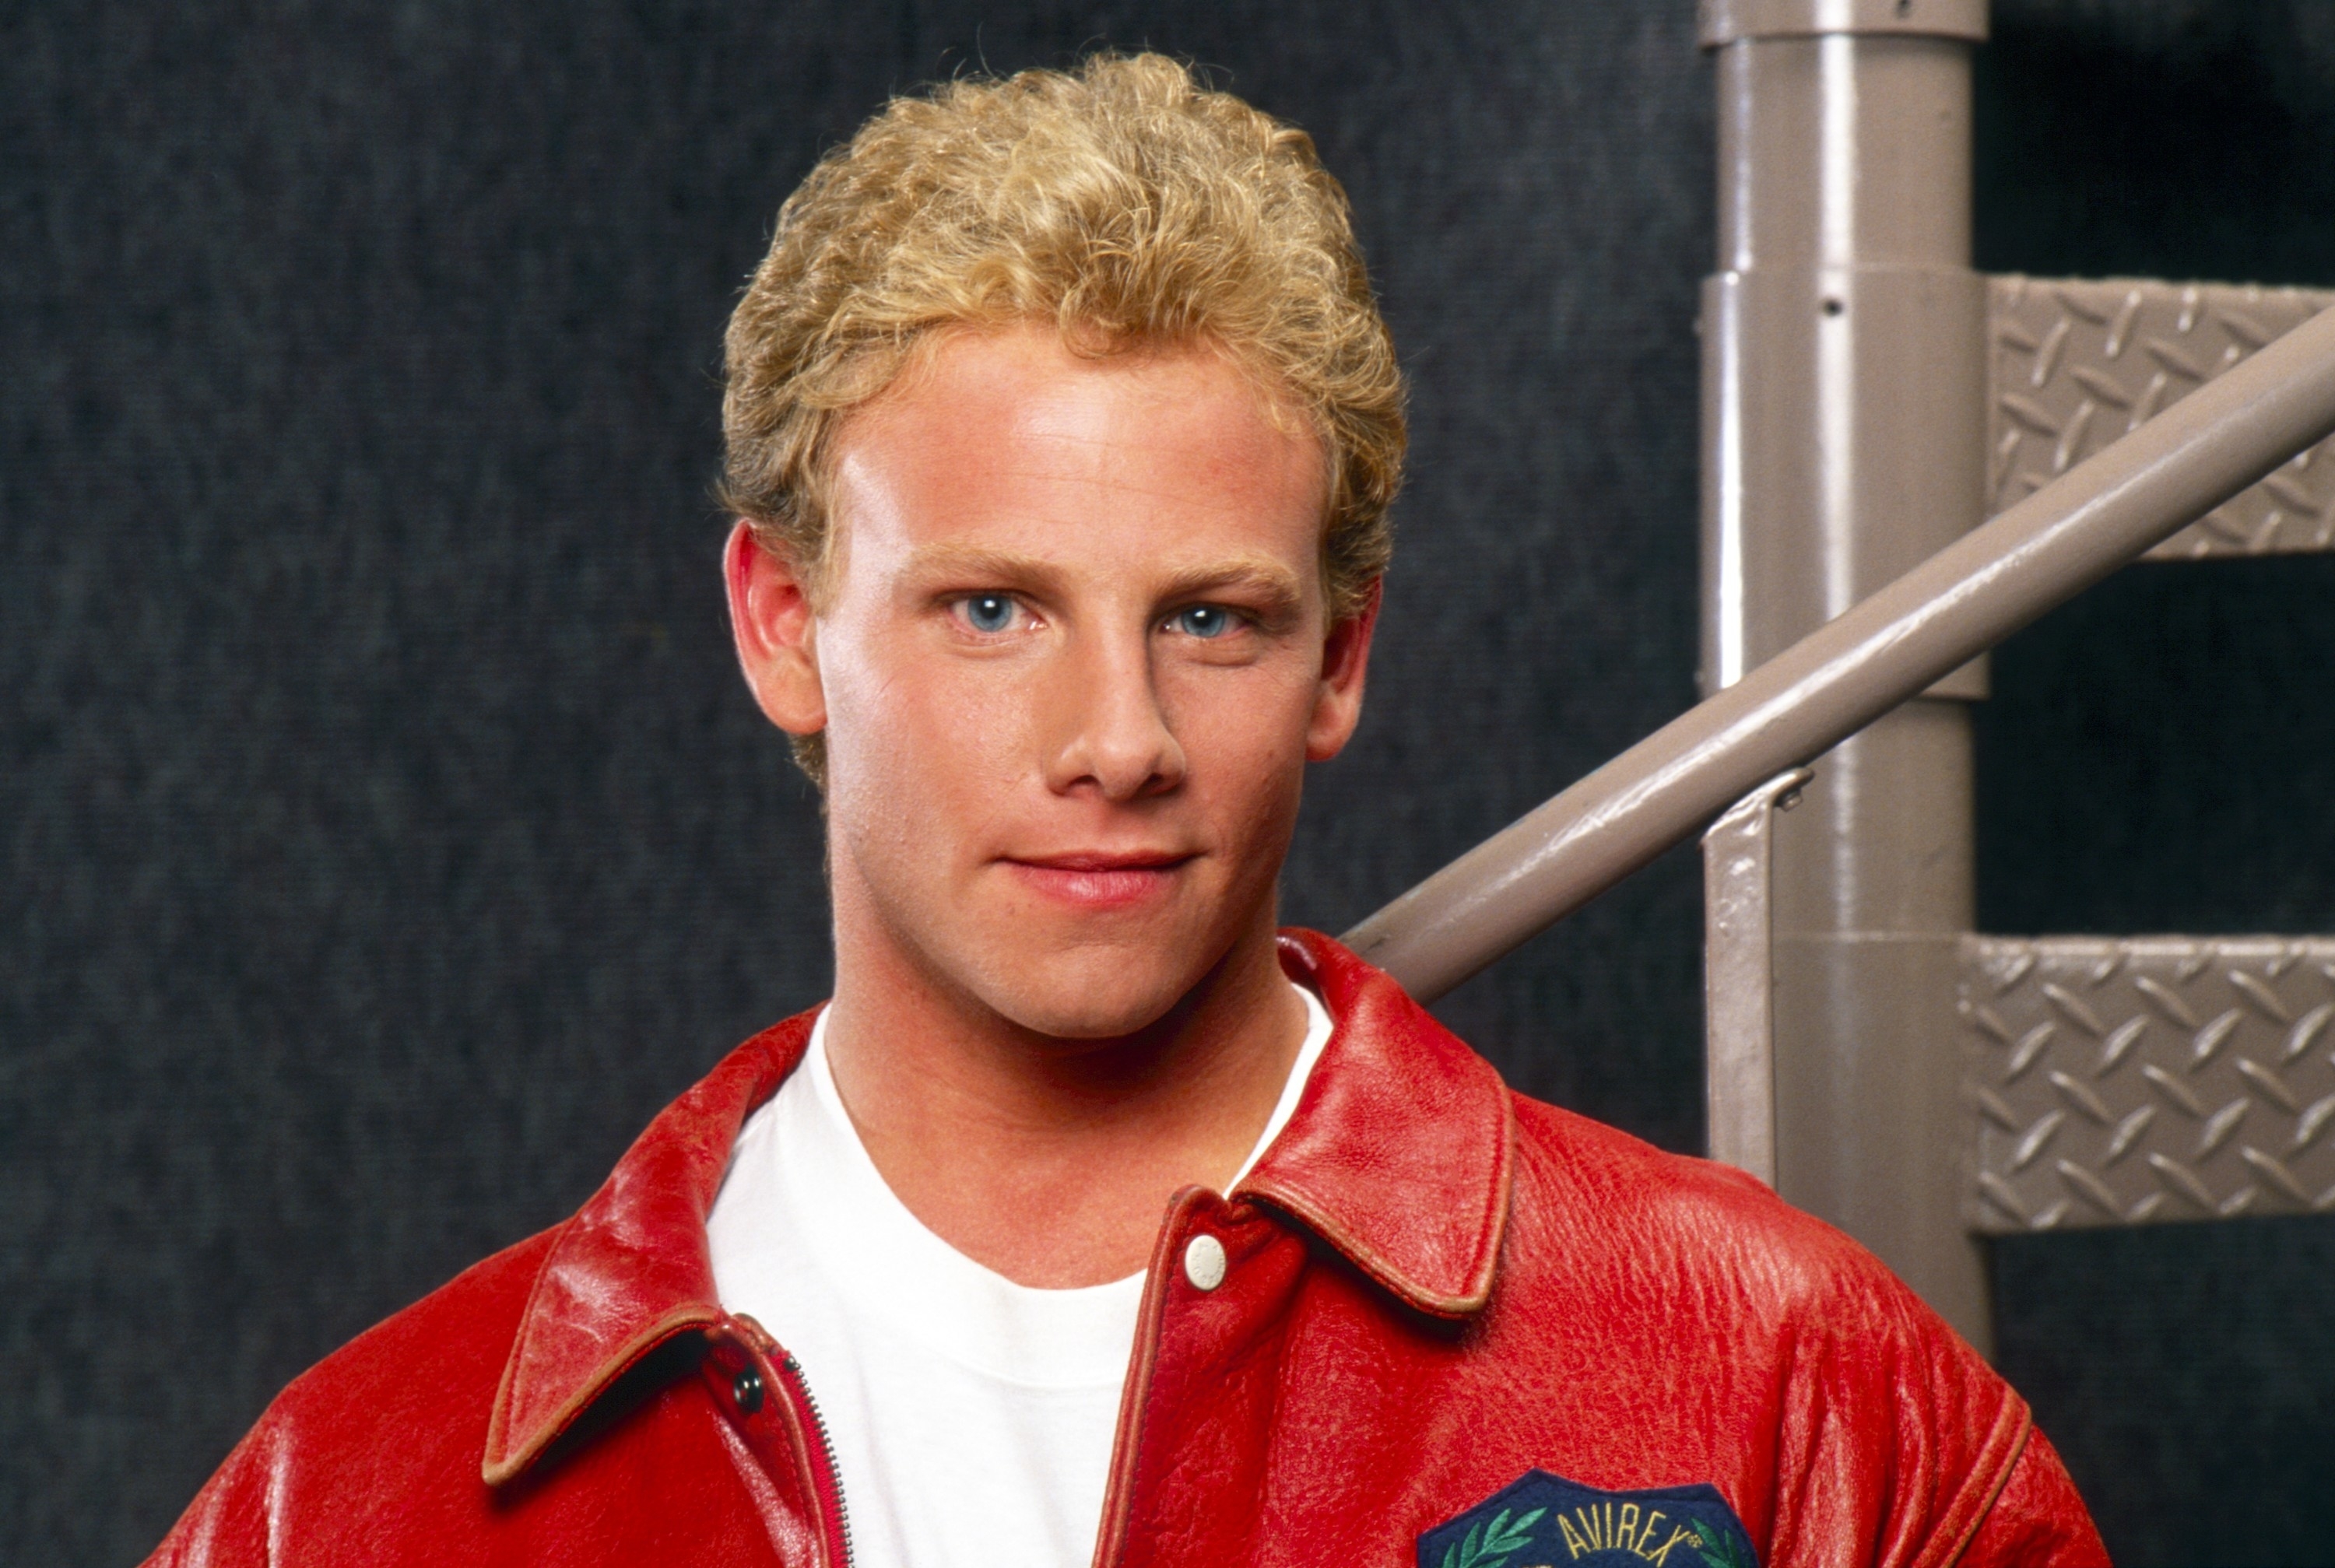 Actor in a red jacket with &quot;California University&quot; emblem, from a 90s TV show